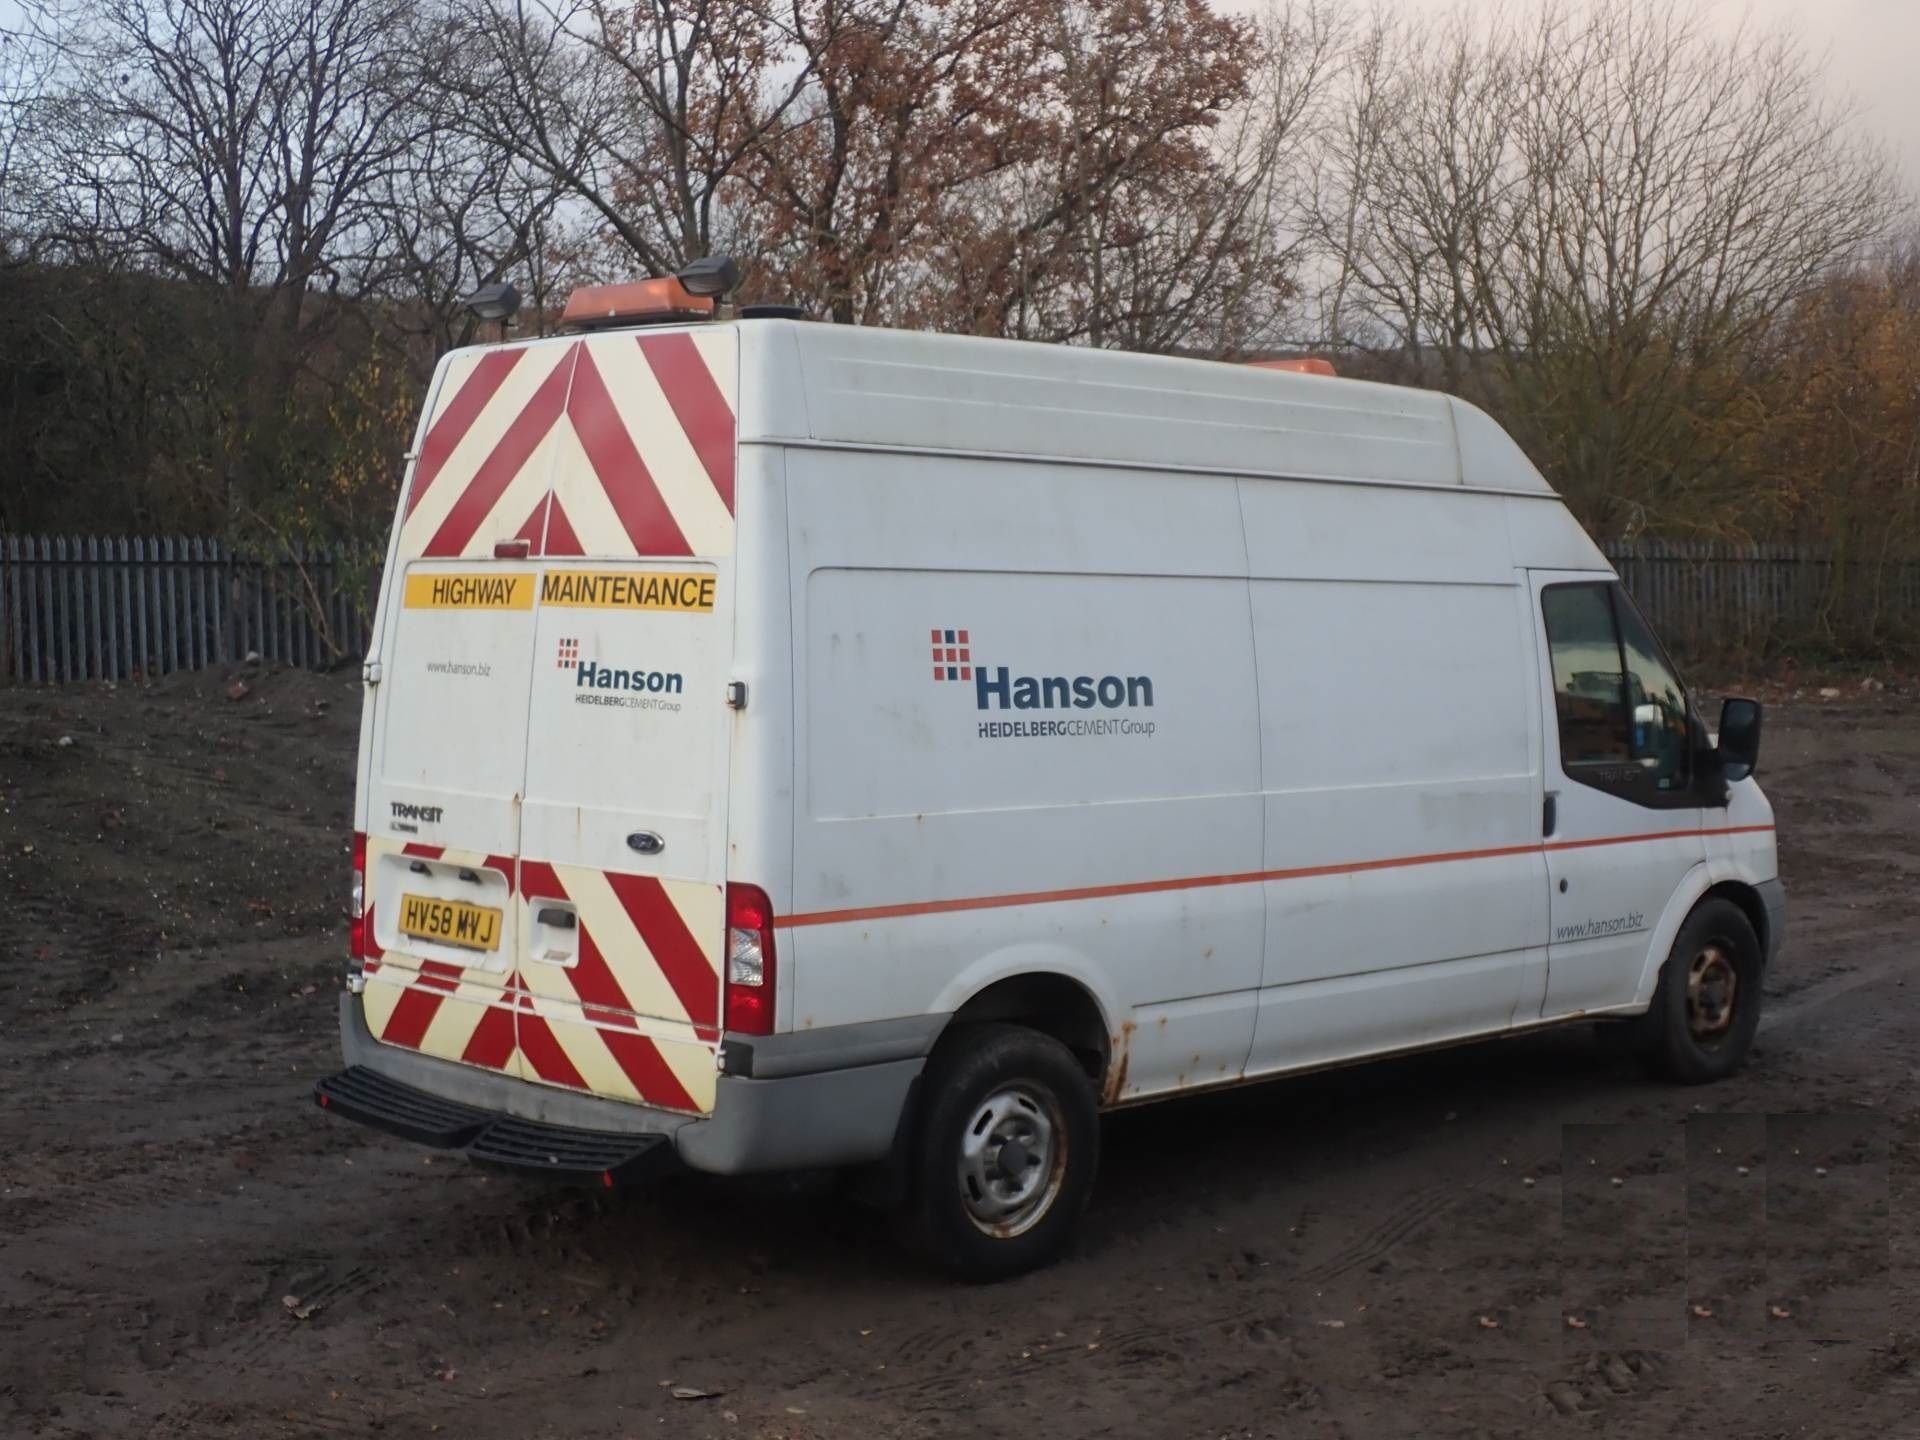 2008 Ford Transit 350 LWB 115 RWD 5 Door Panel Van - CL505 - Location: Corby, Northamptonshire - Image 2 of 12